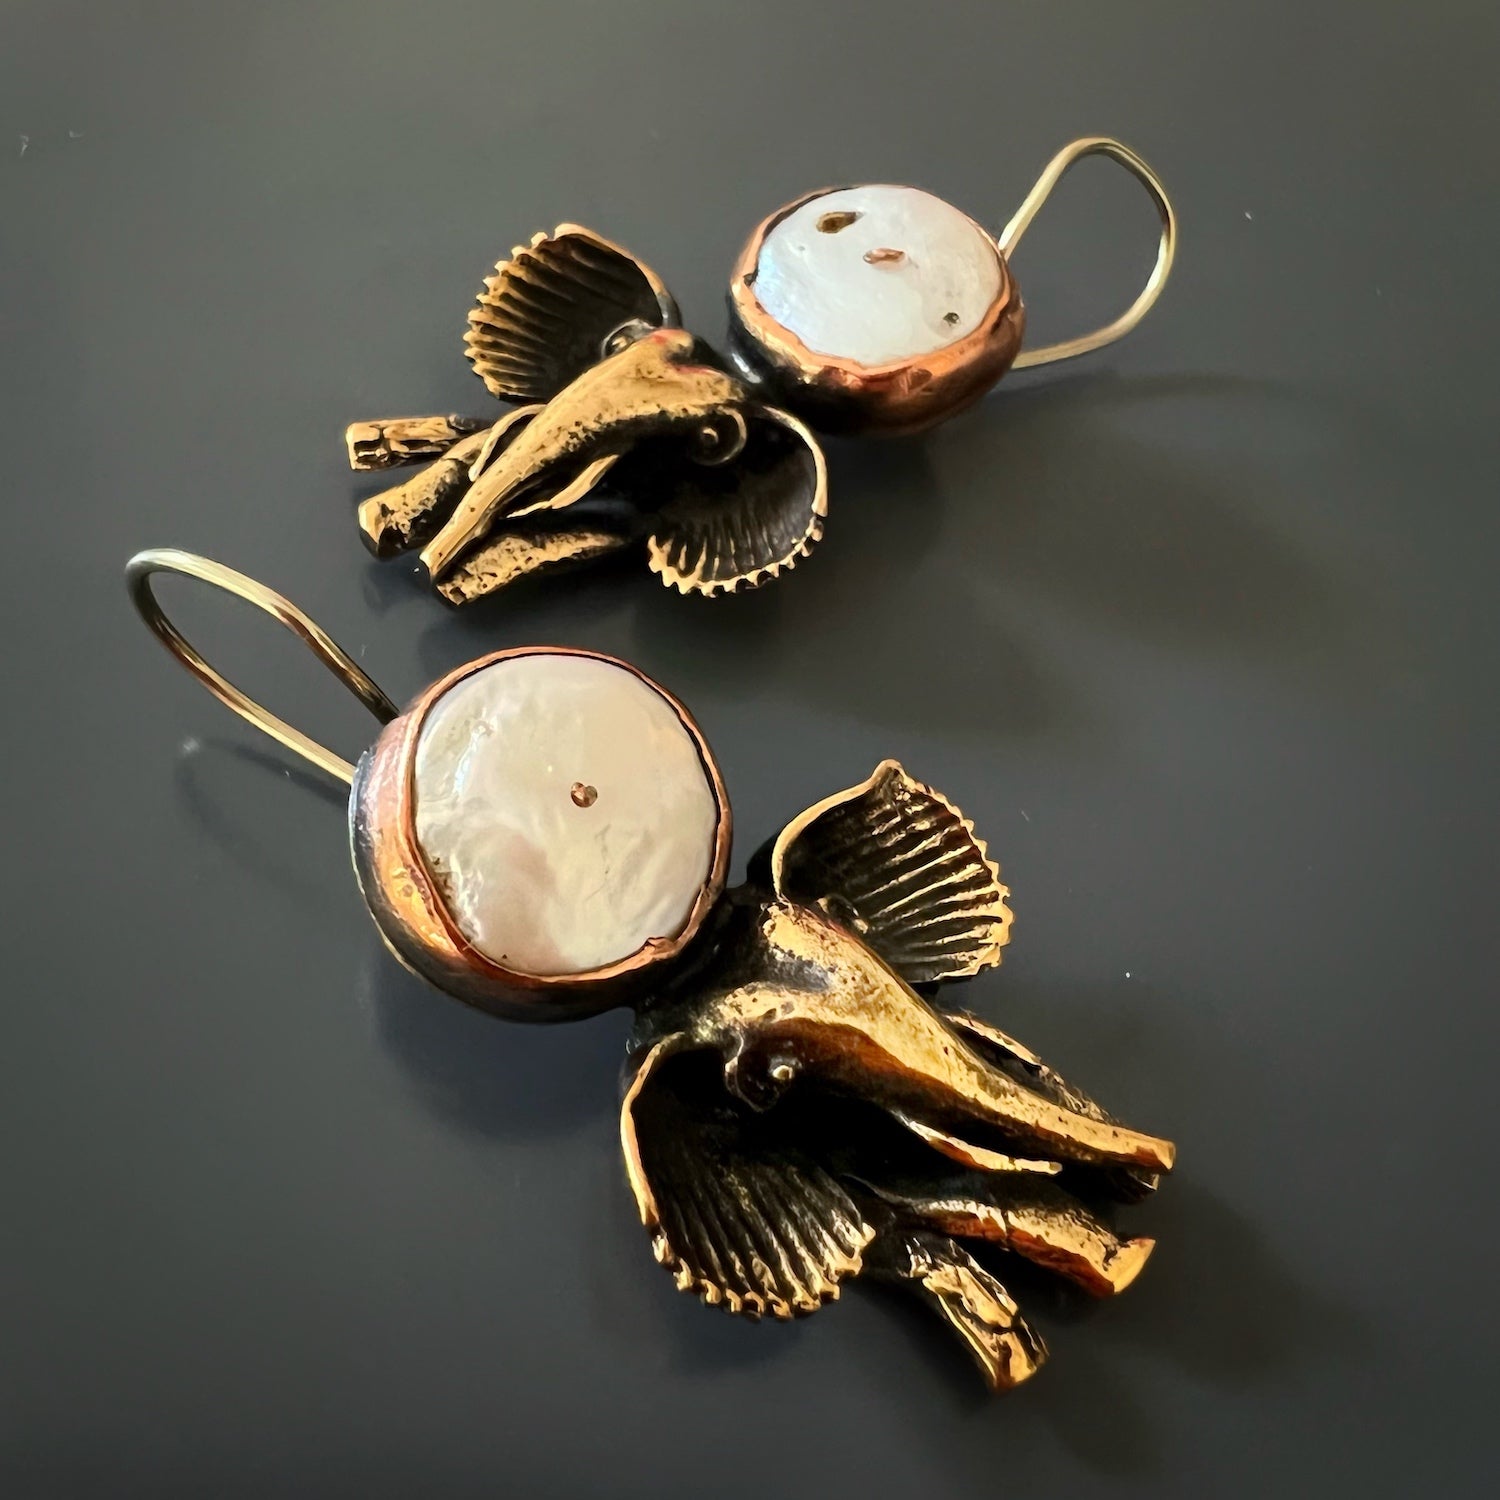 the Handmade Unique Spirit Elephant Earrings, showcasing how they beautifully frame the face and add a touch of elegance and character to any outfit.